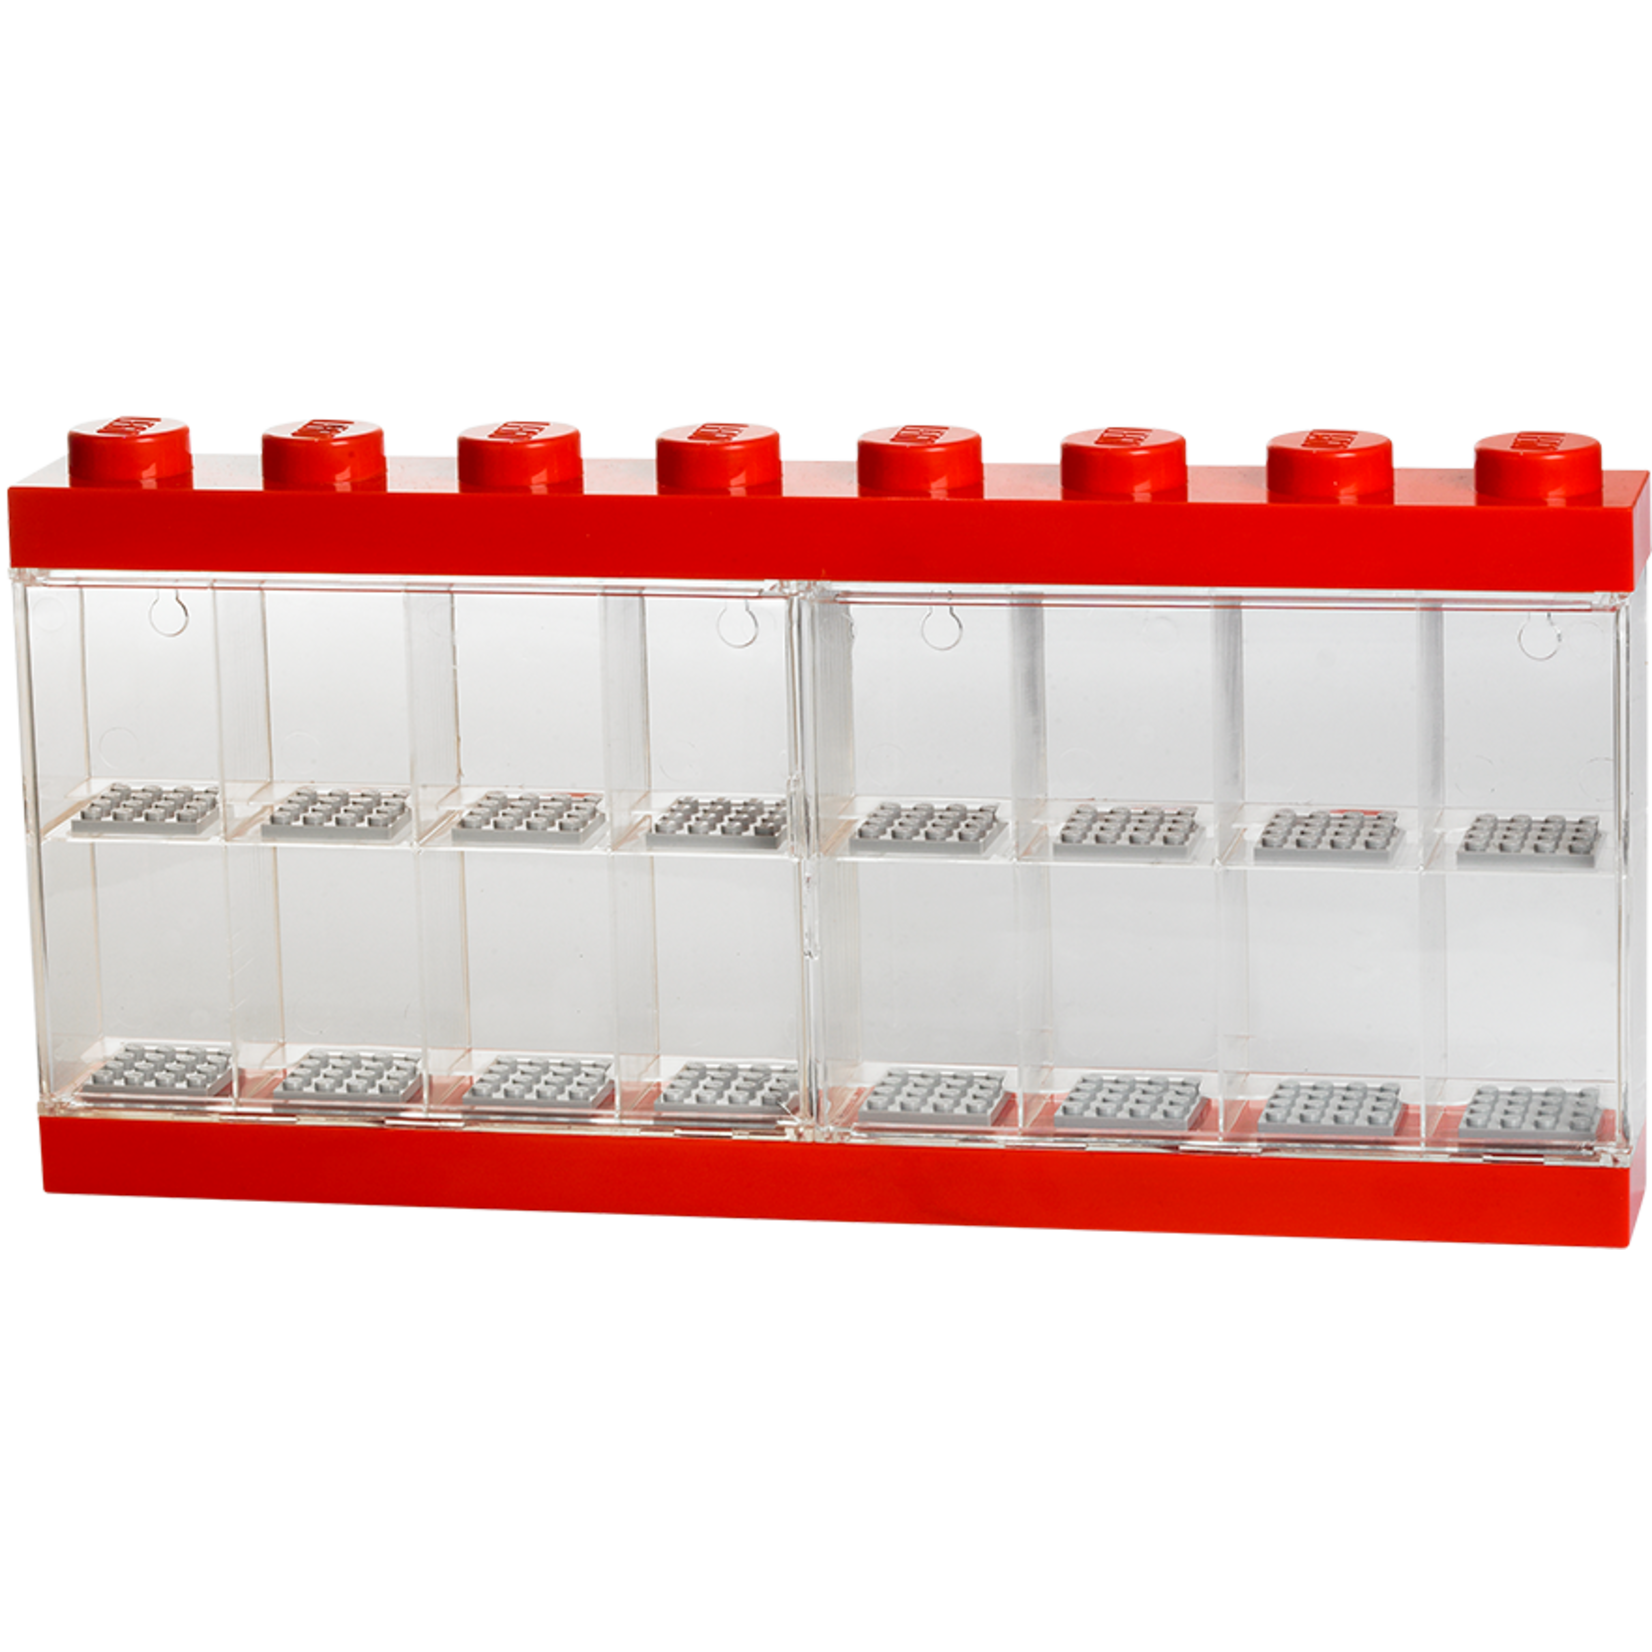 LEGO LEGO Minifigure Display Case 16 Bright Red